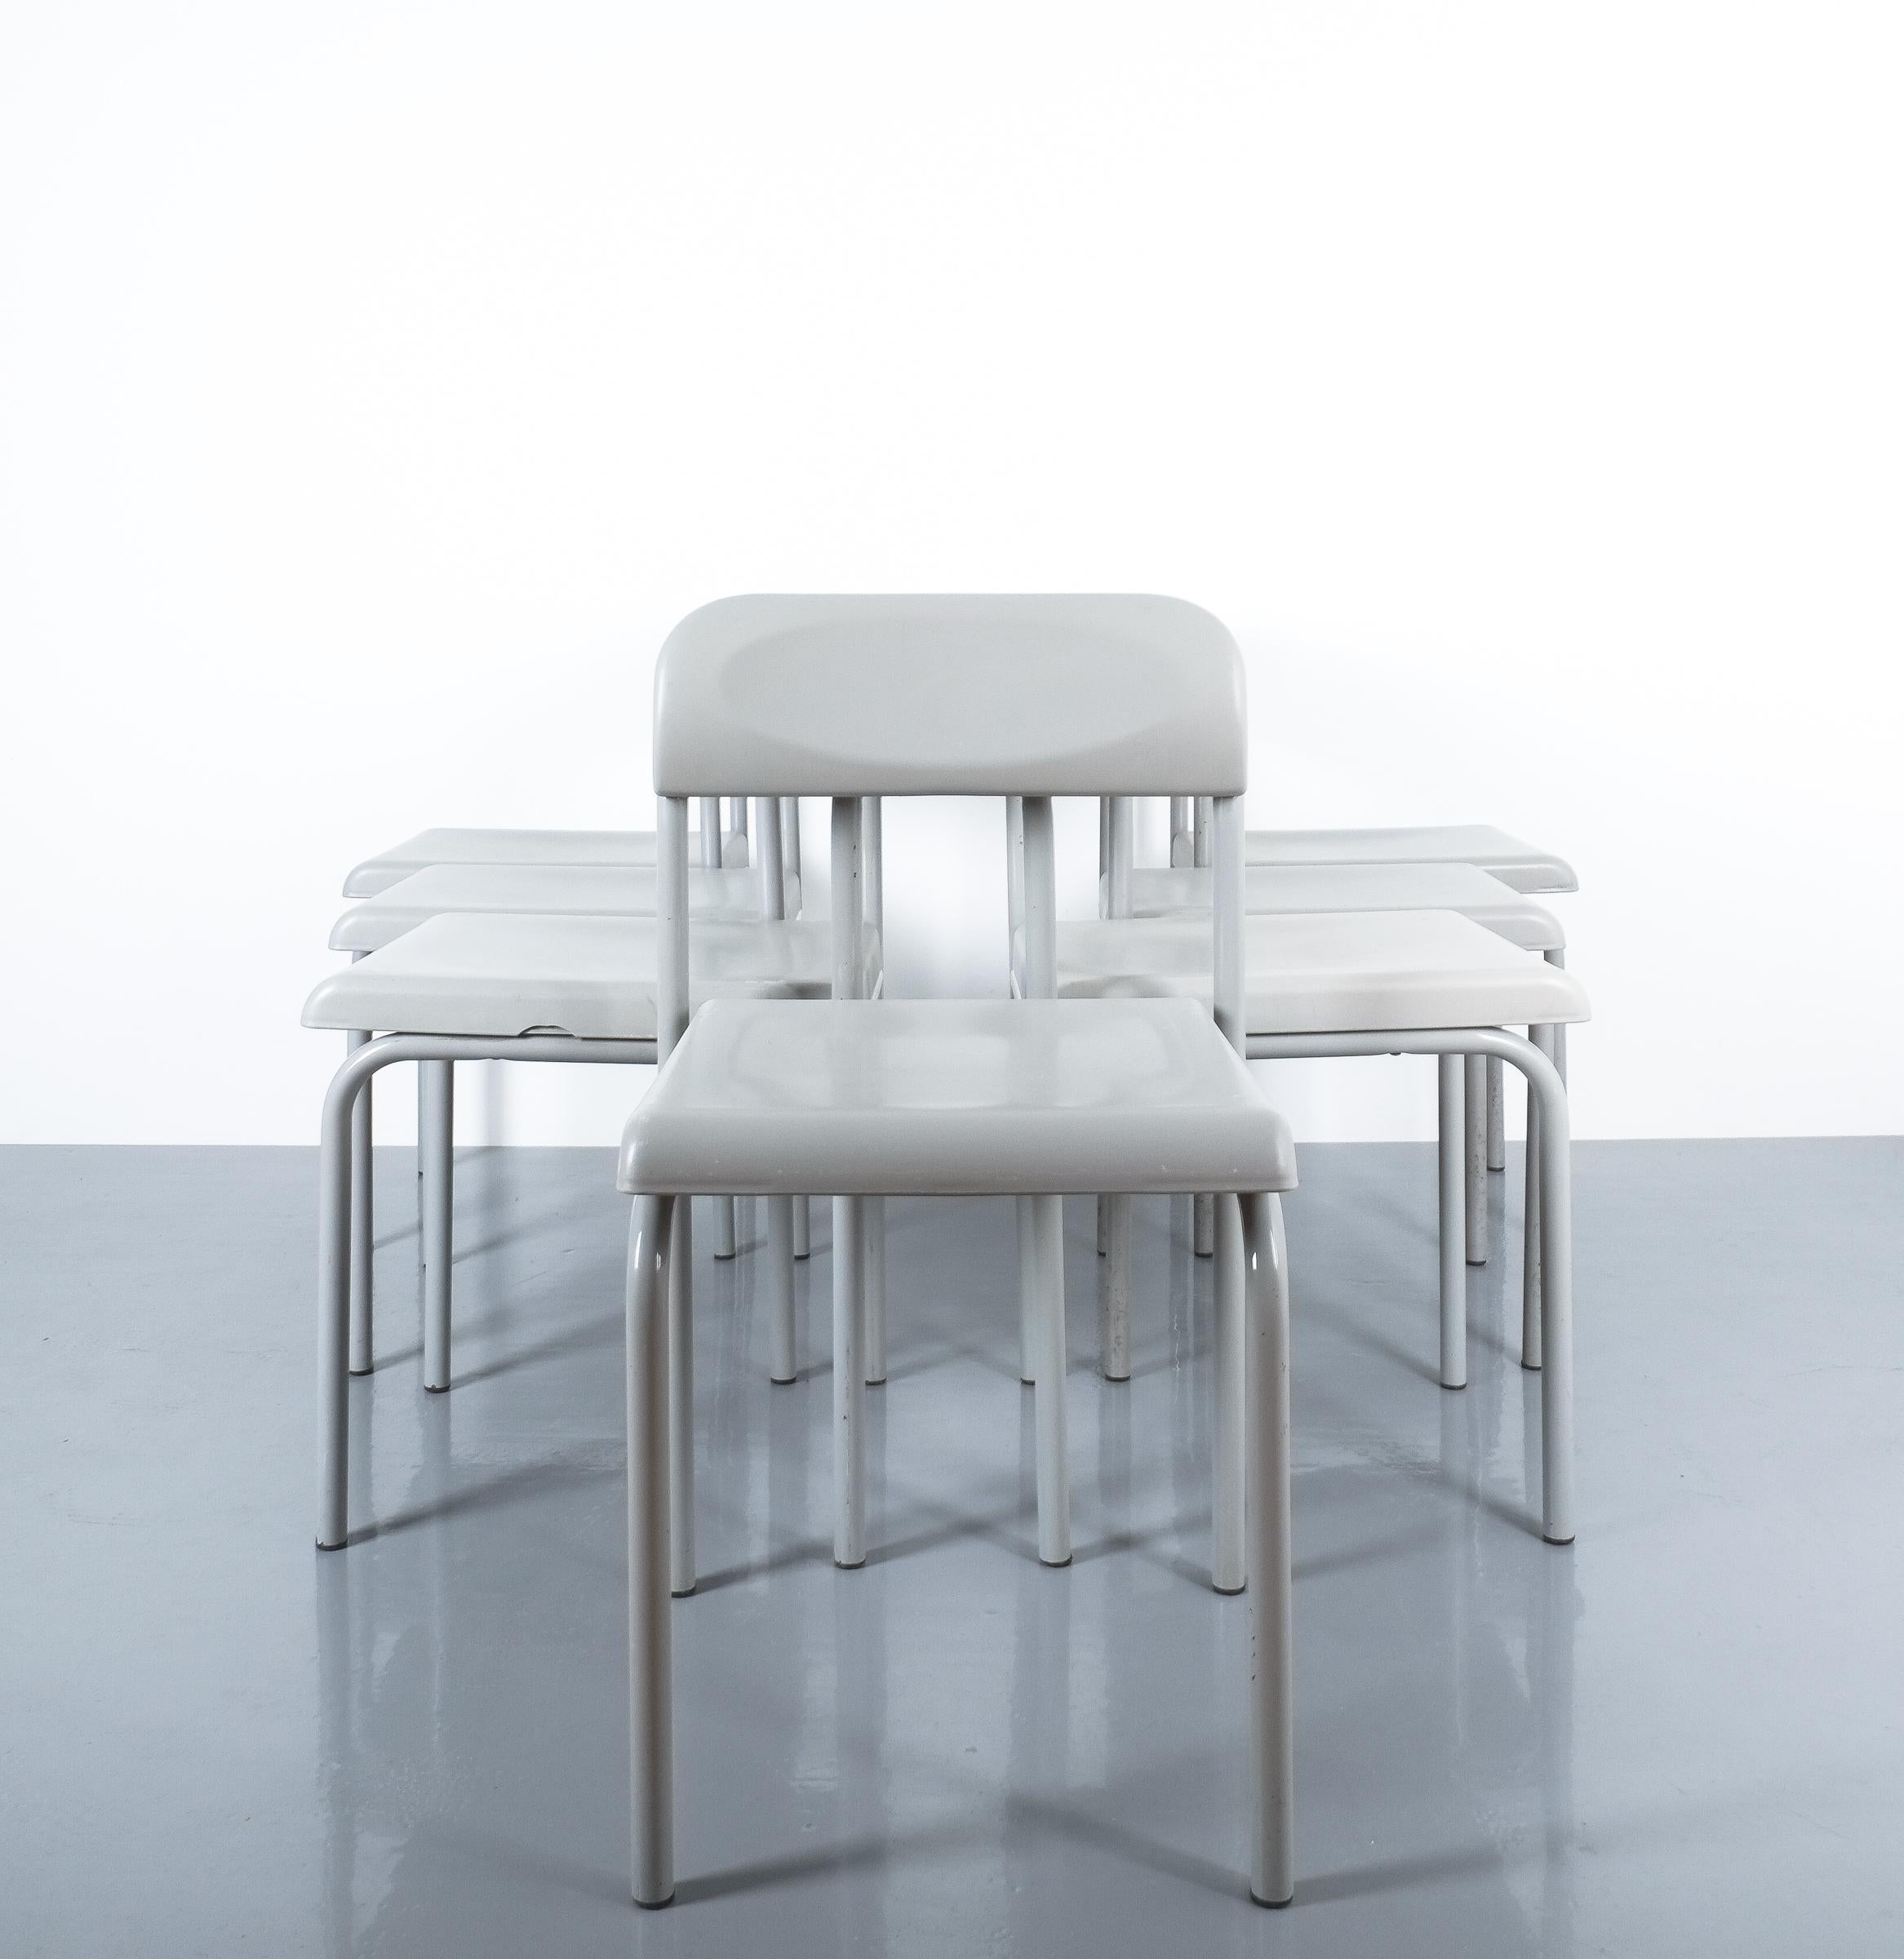 One of Seven Ettore Sottsass Greek Chairs Grey Bieffeplast, Italy, 1980.

Sold and priced per piece.

Very rare light grey chairs made from lacquered tubular steel and plastic seat and backrest. They are labeled Bieffeplast. 4 pieces are in good